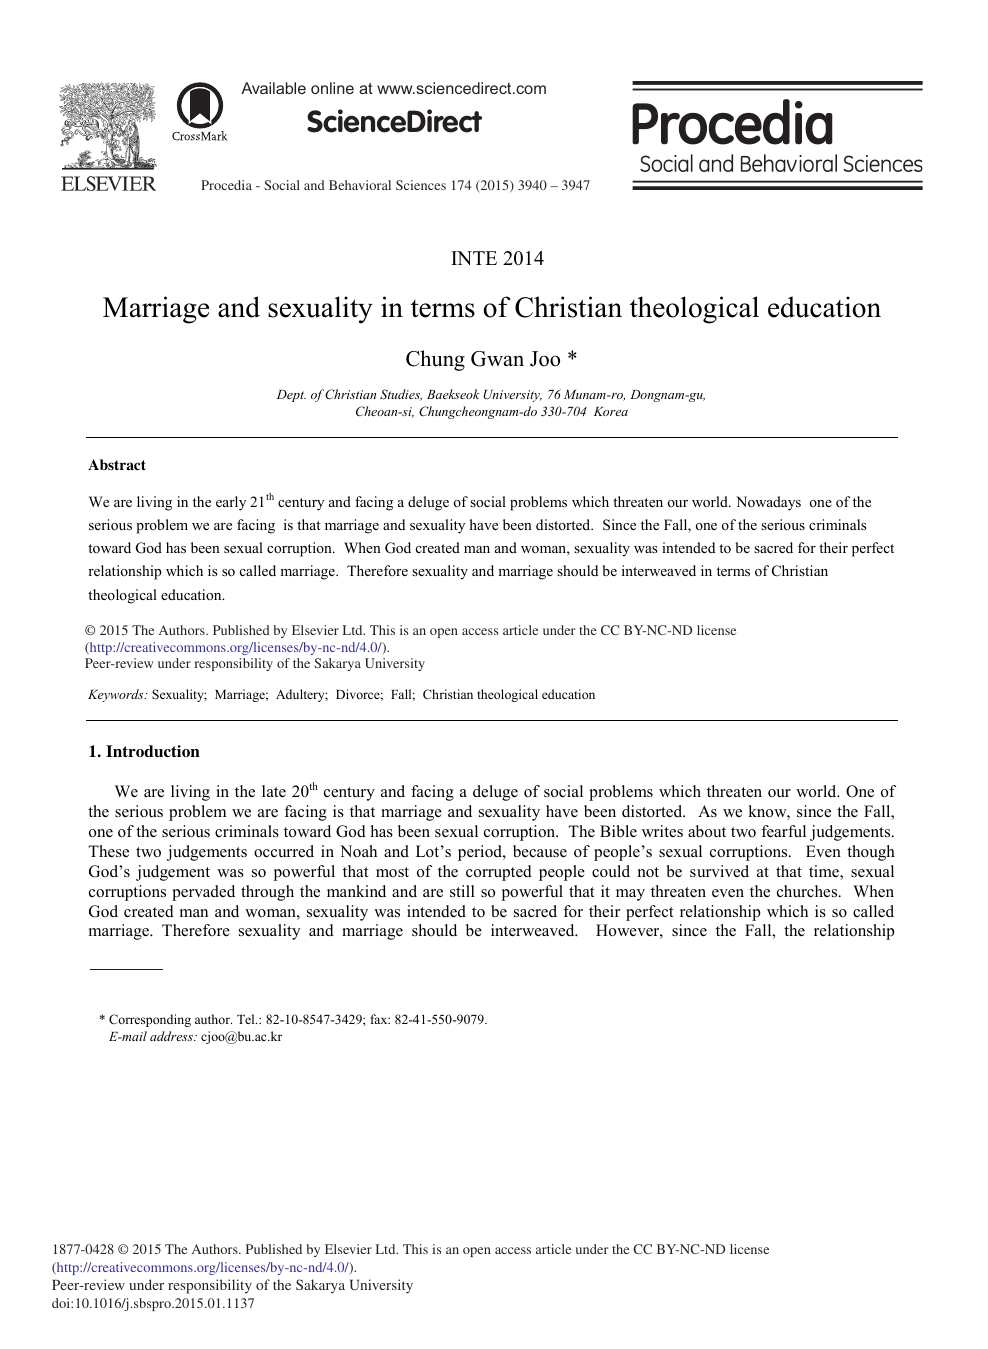 Marriage and Sexuality in Terms of Christian Theological Education